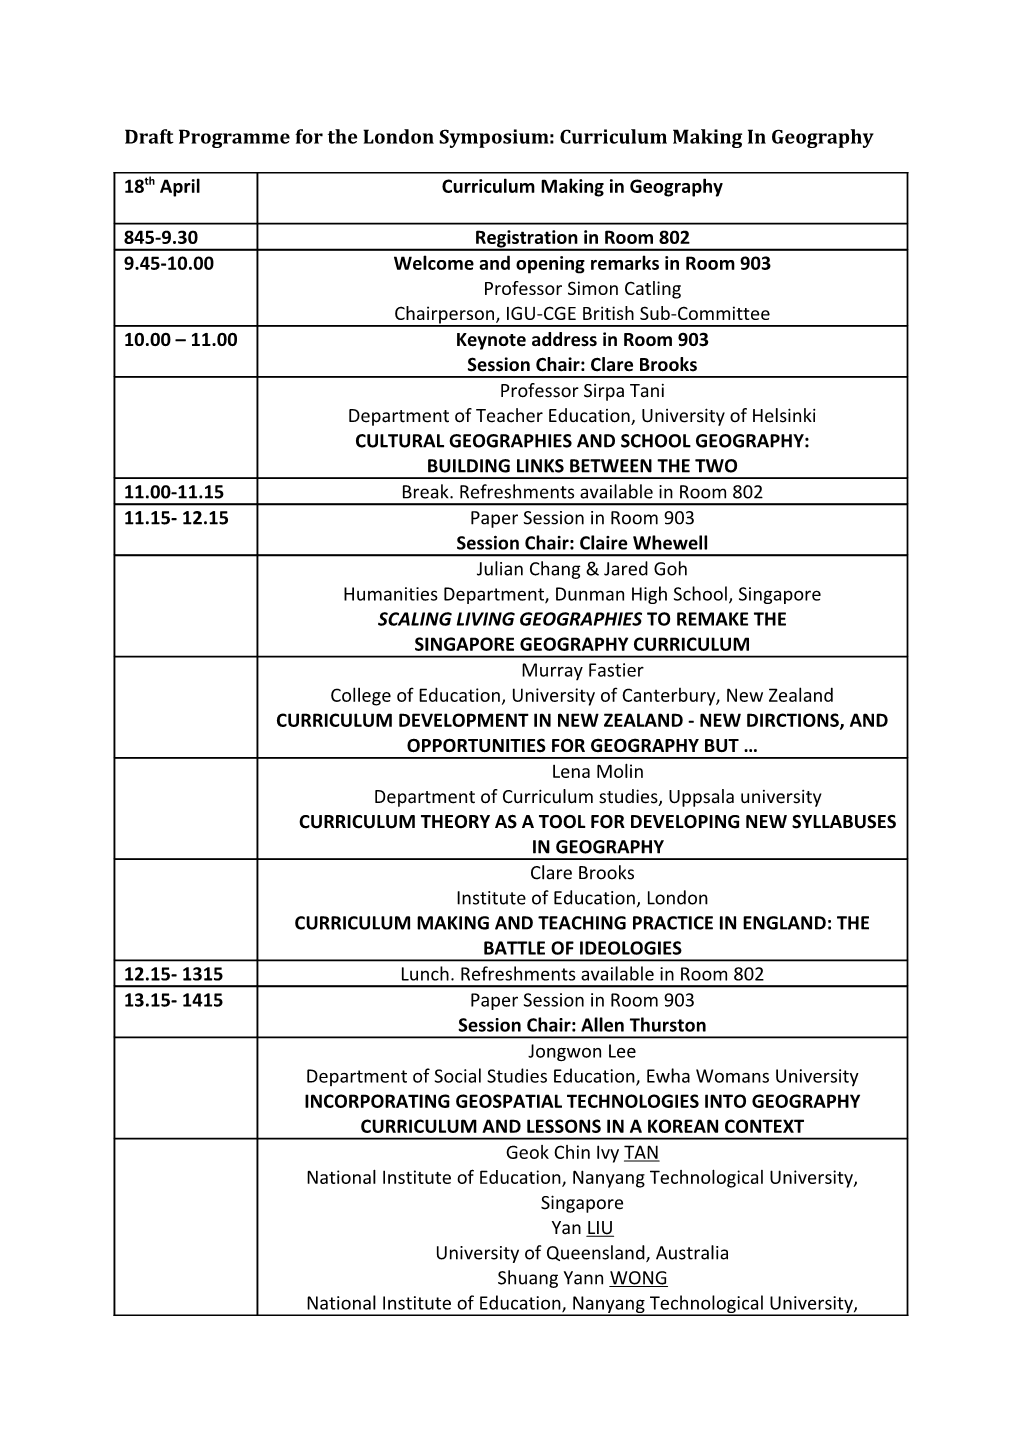 Draft Programme for the London Symposium: Curriculum Making in Geography